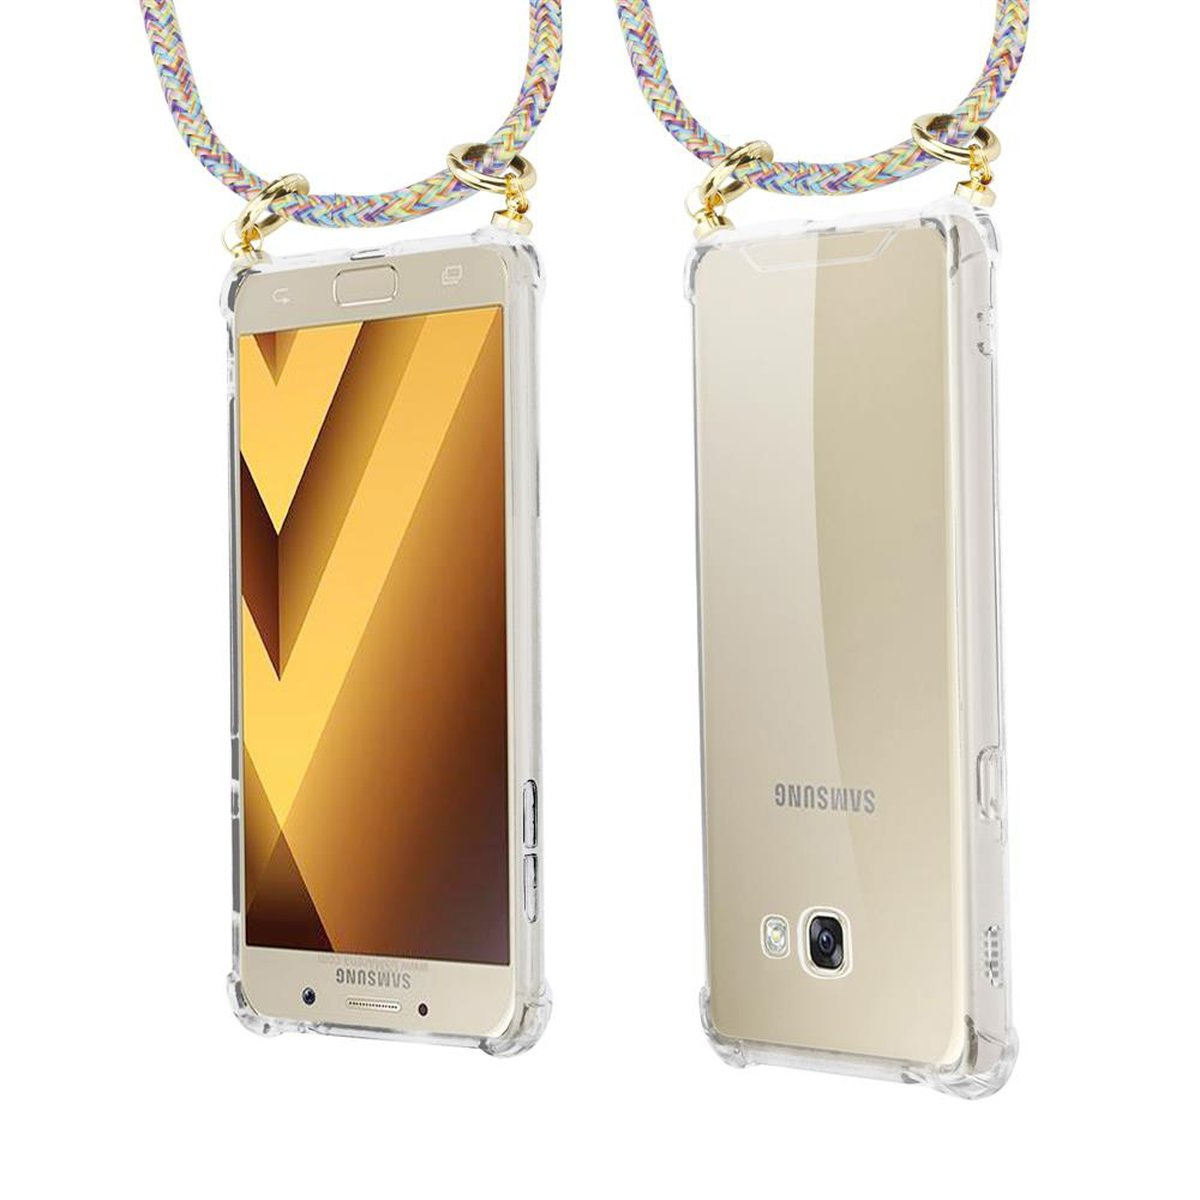 Handy Backcover, Kordel Ringen, CADORABO Gold Hülle, RAINBOW und Band Kette Galaxy A5 mit 2017, Samsung, abnehmbarer